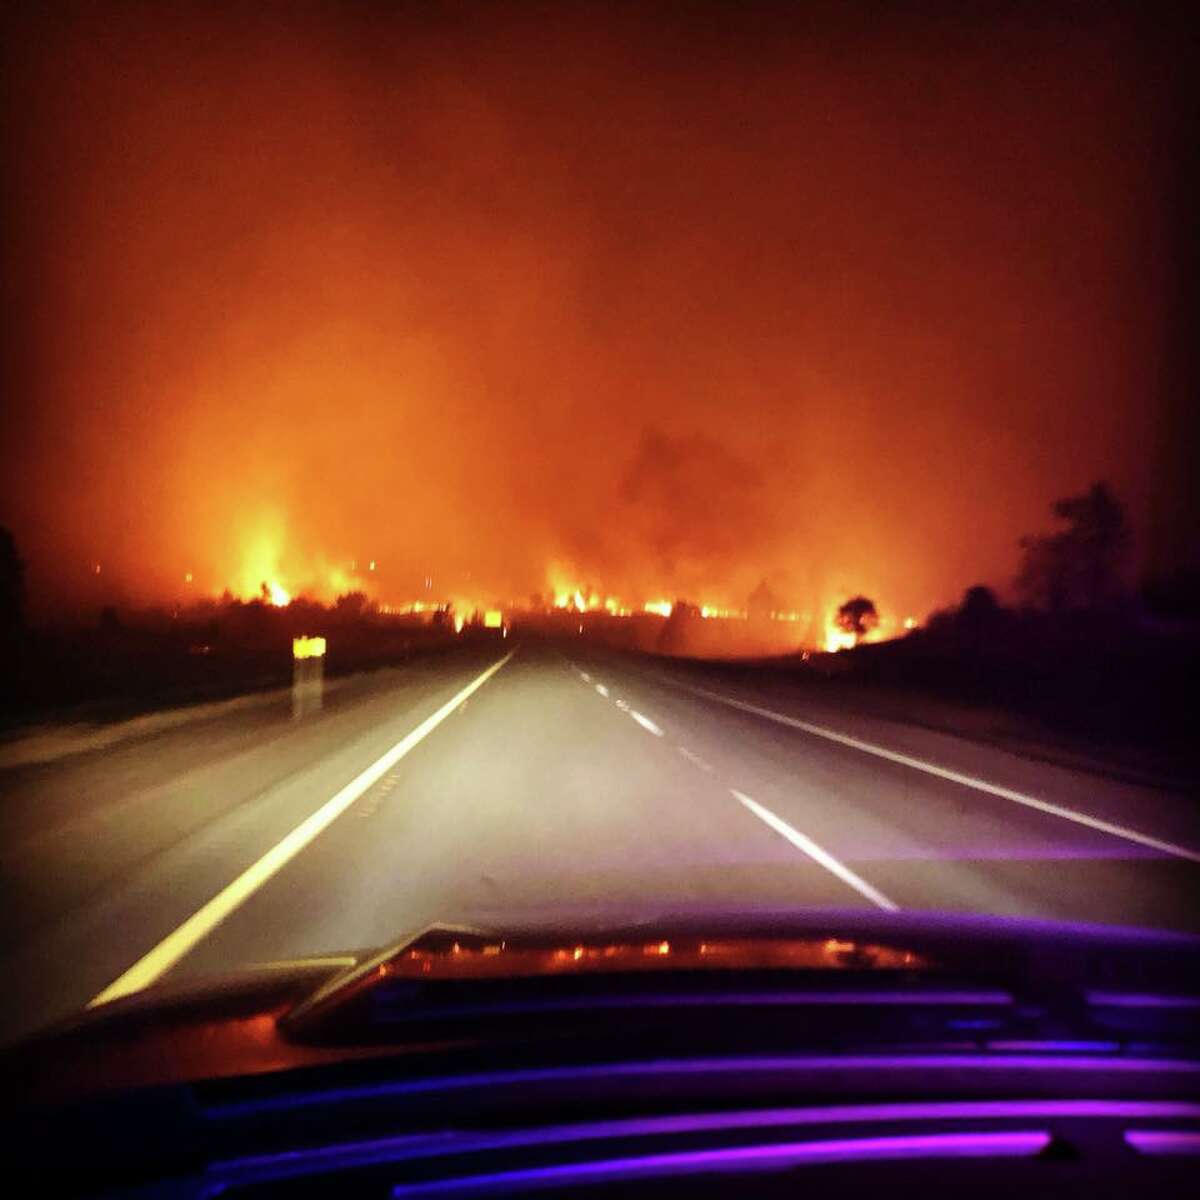 CHP Redding posted these photos of the Klamathon Fire in Hornbrook, California.